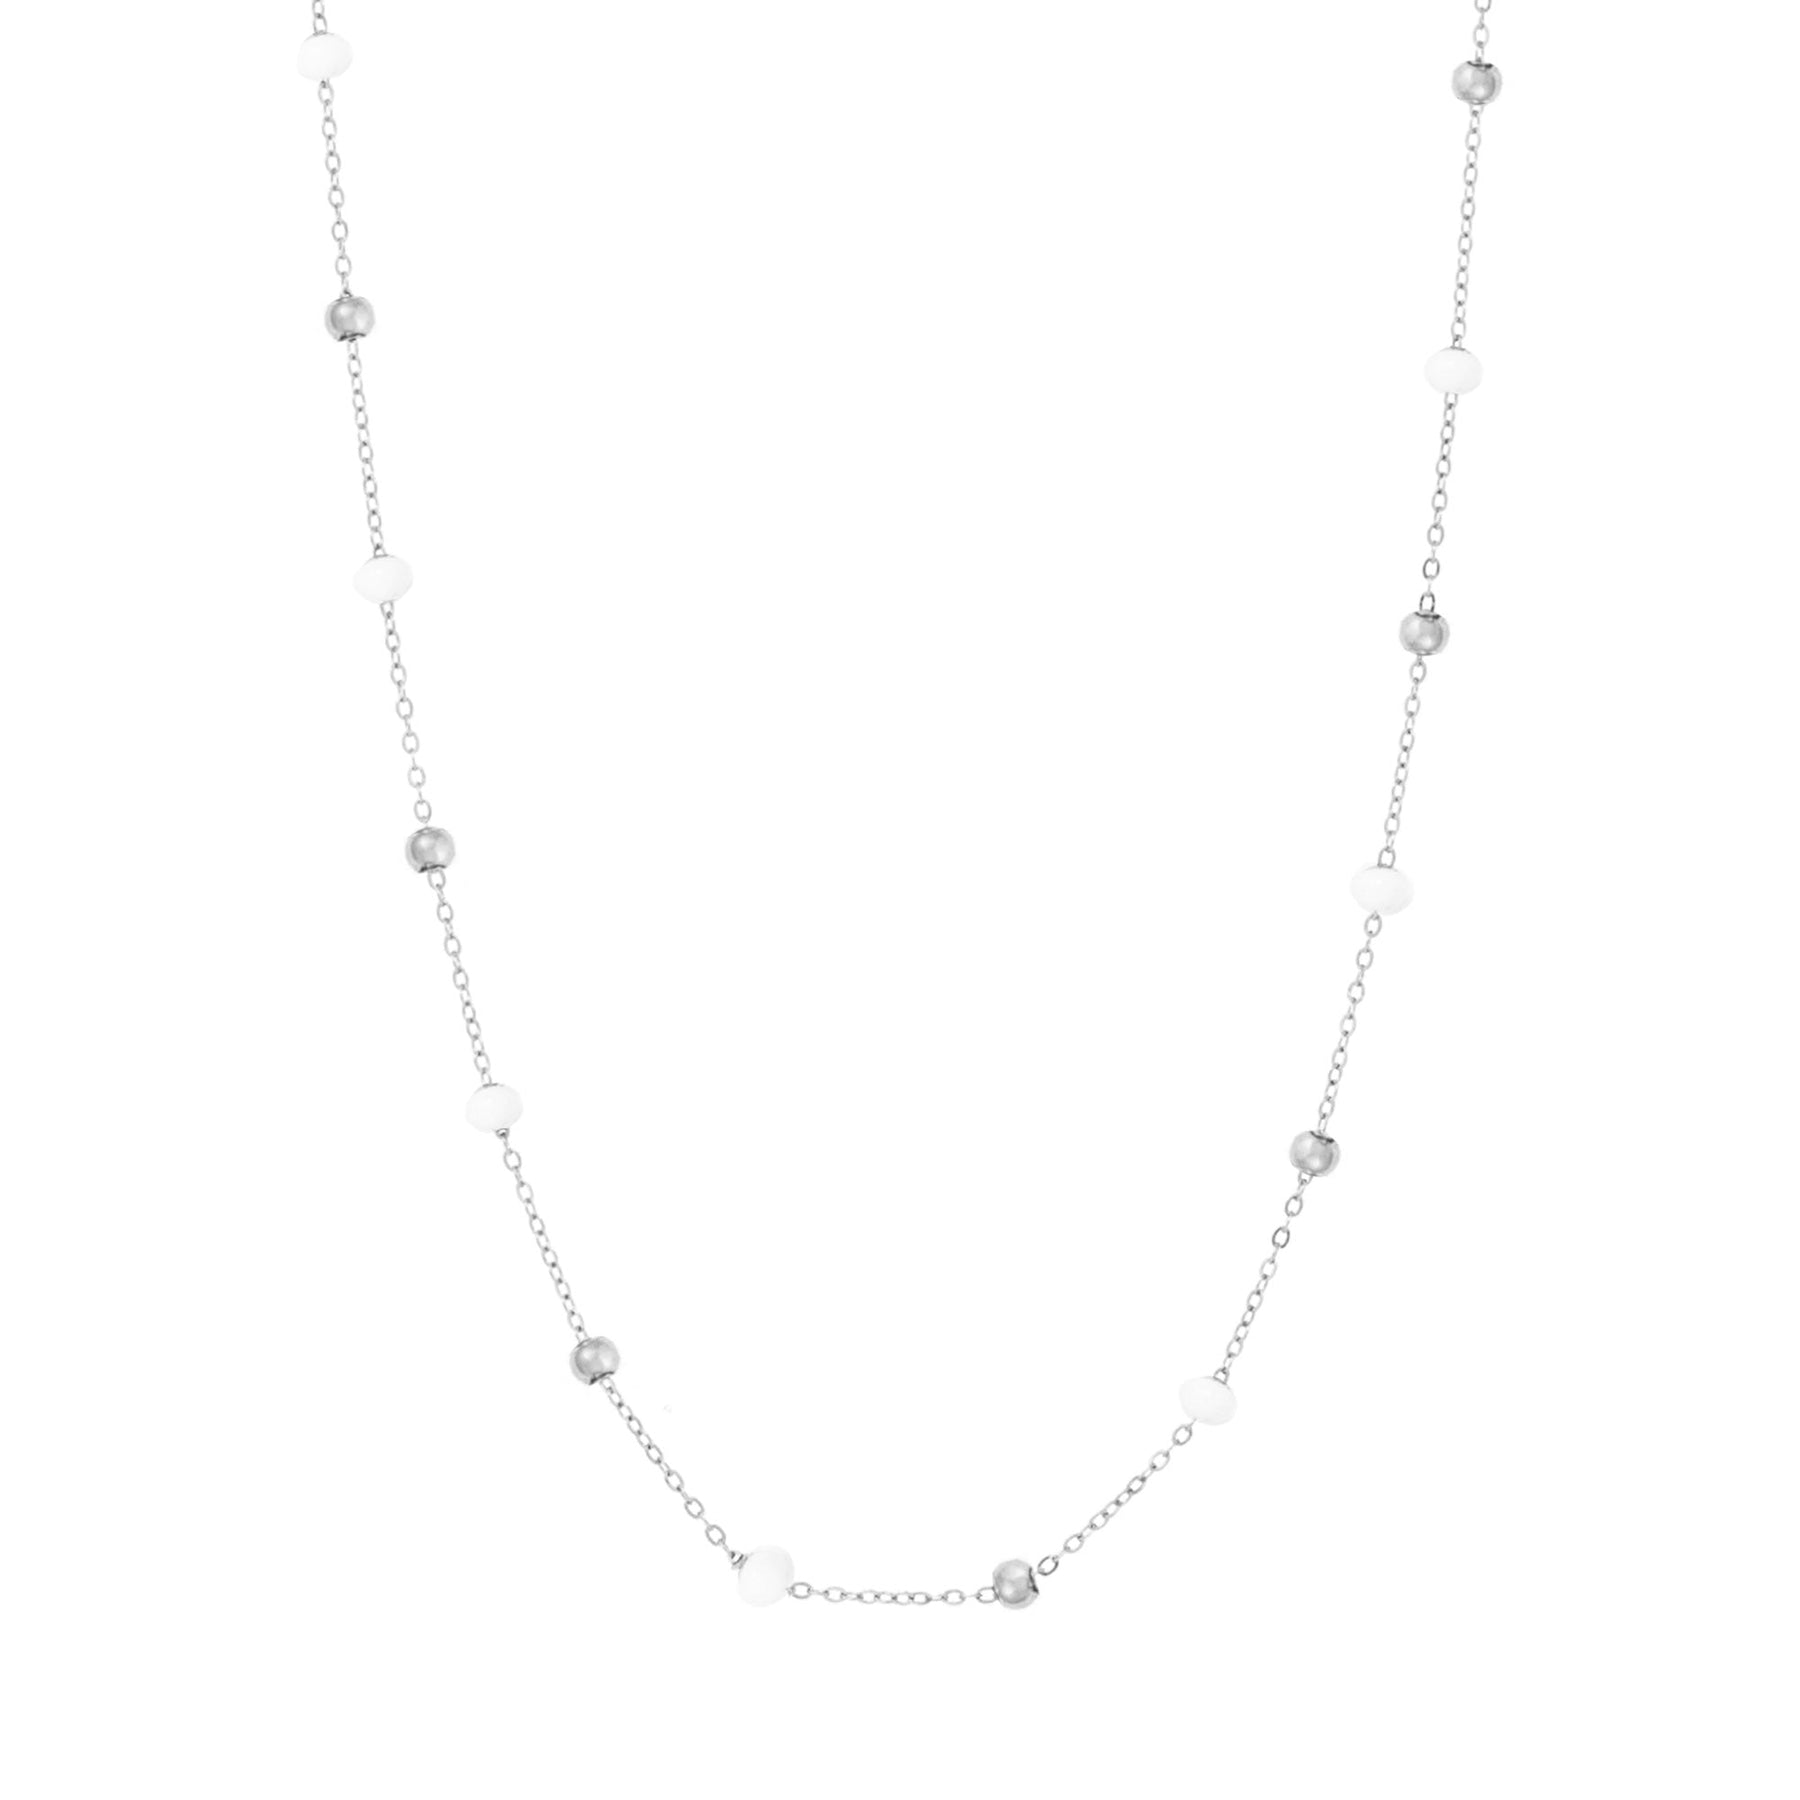 BohoMoon Stainless Steel White Sands Necklace Silver